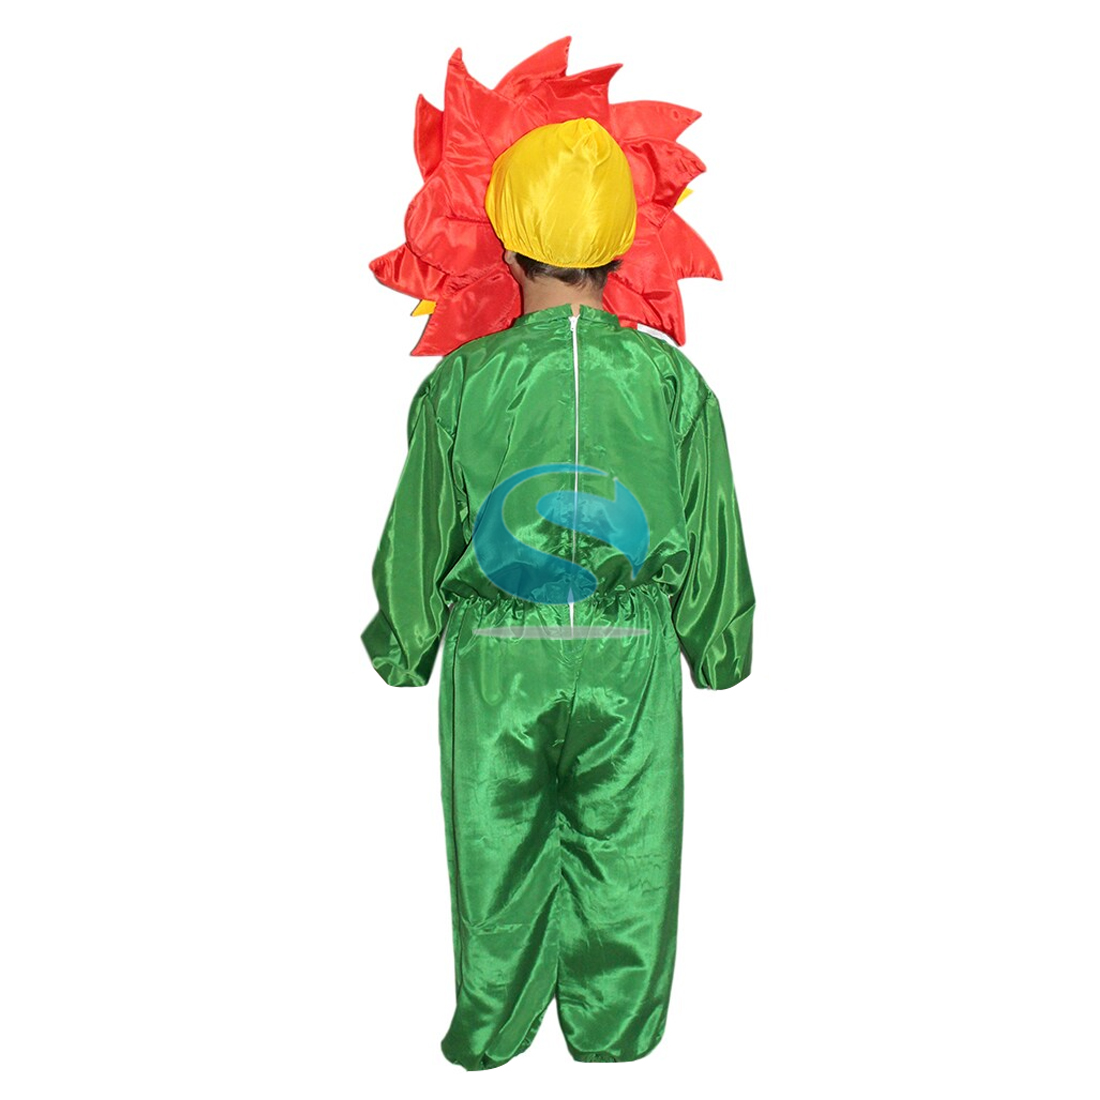 SUNFLOWER COSTUME | Pageant costumes, Recycled costumes, Costume pageant